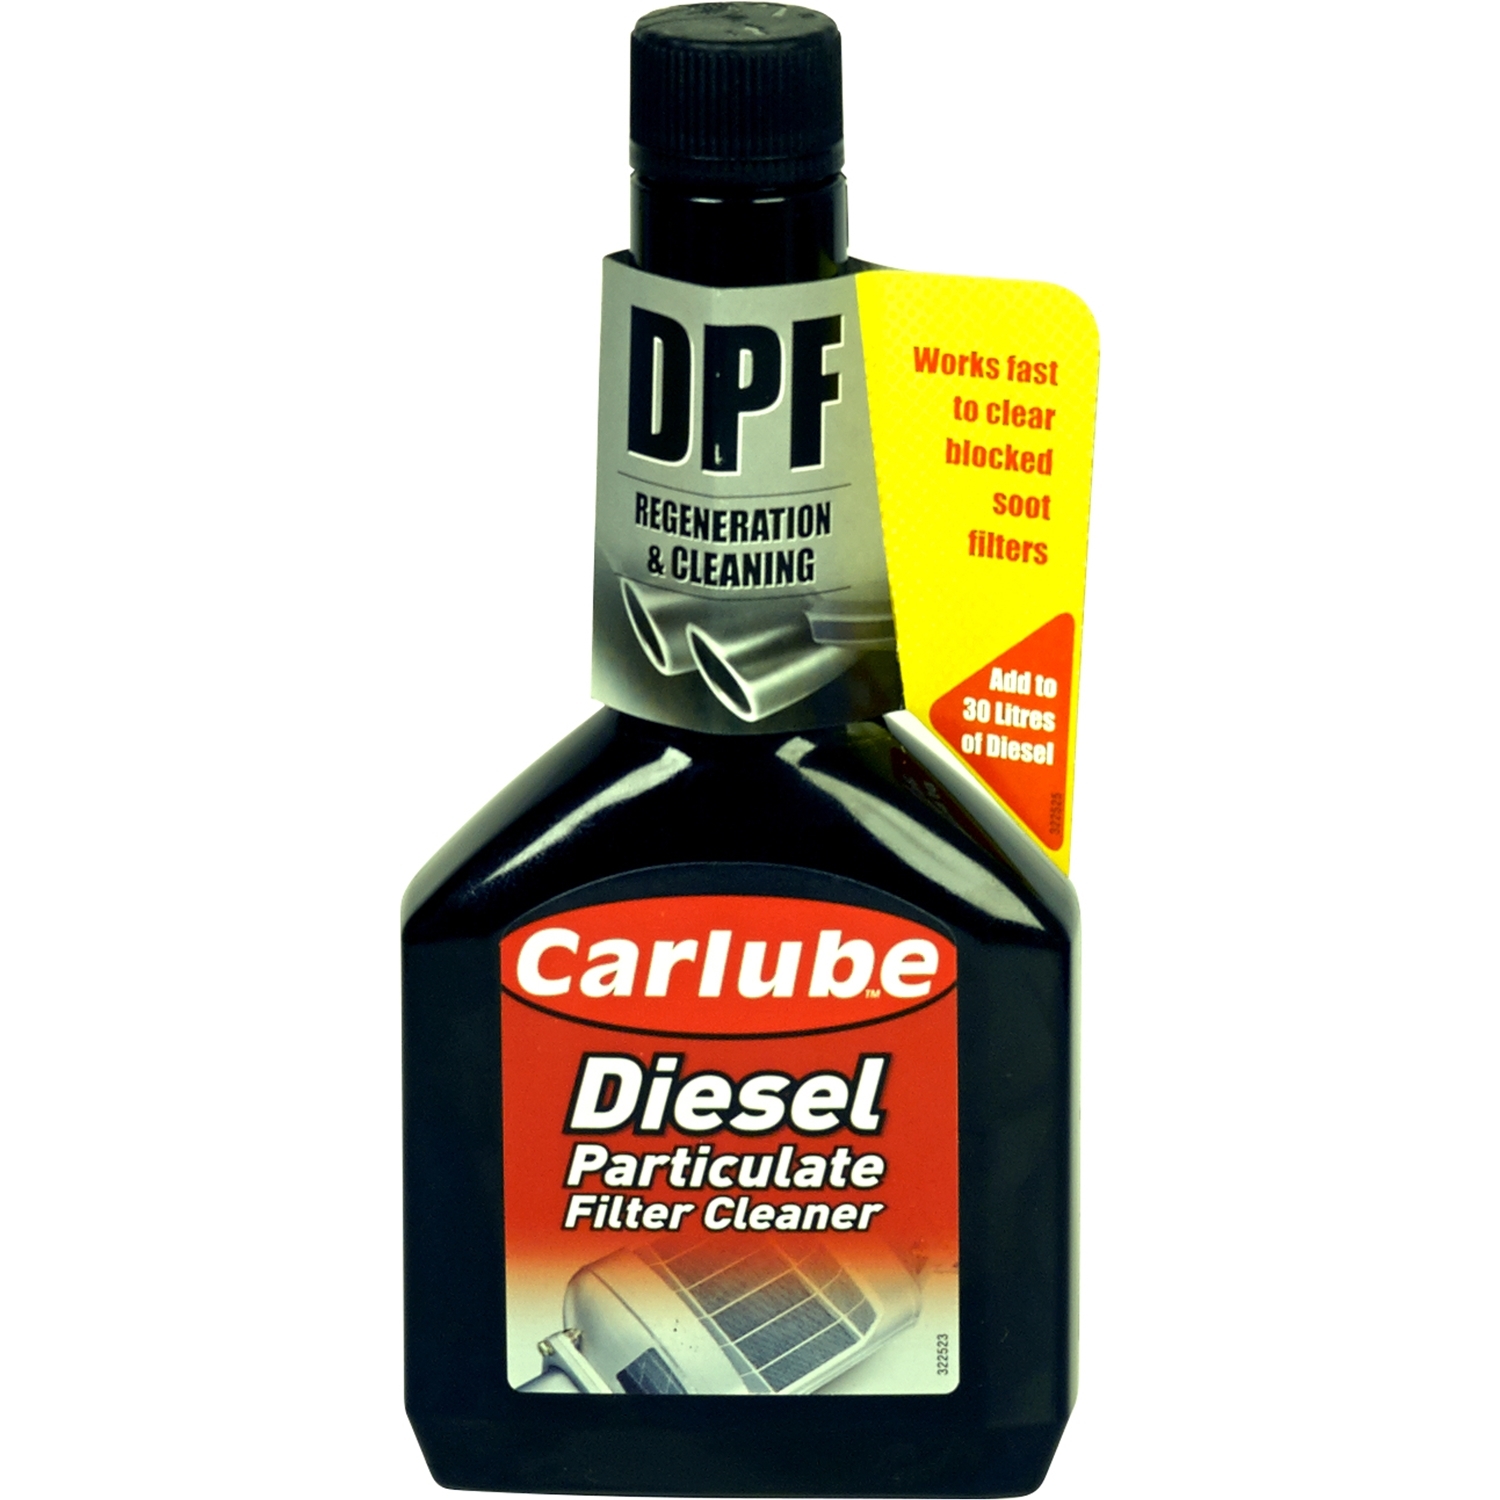 Carlube Diesel Particulate Filter Cleaner Image